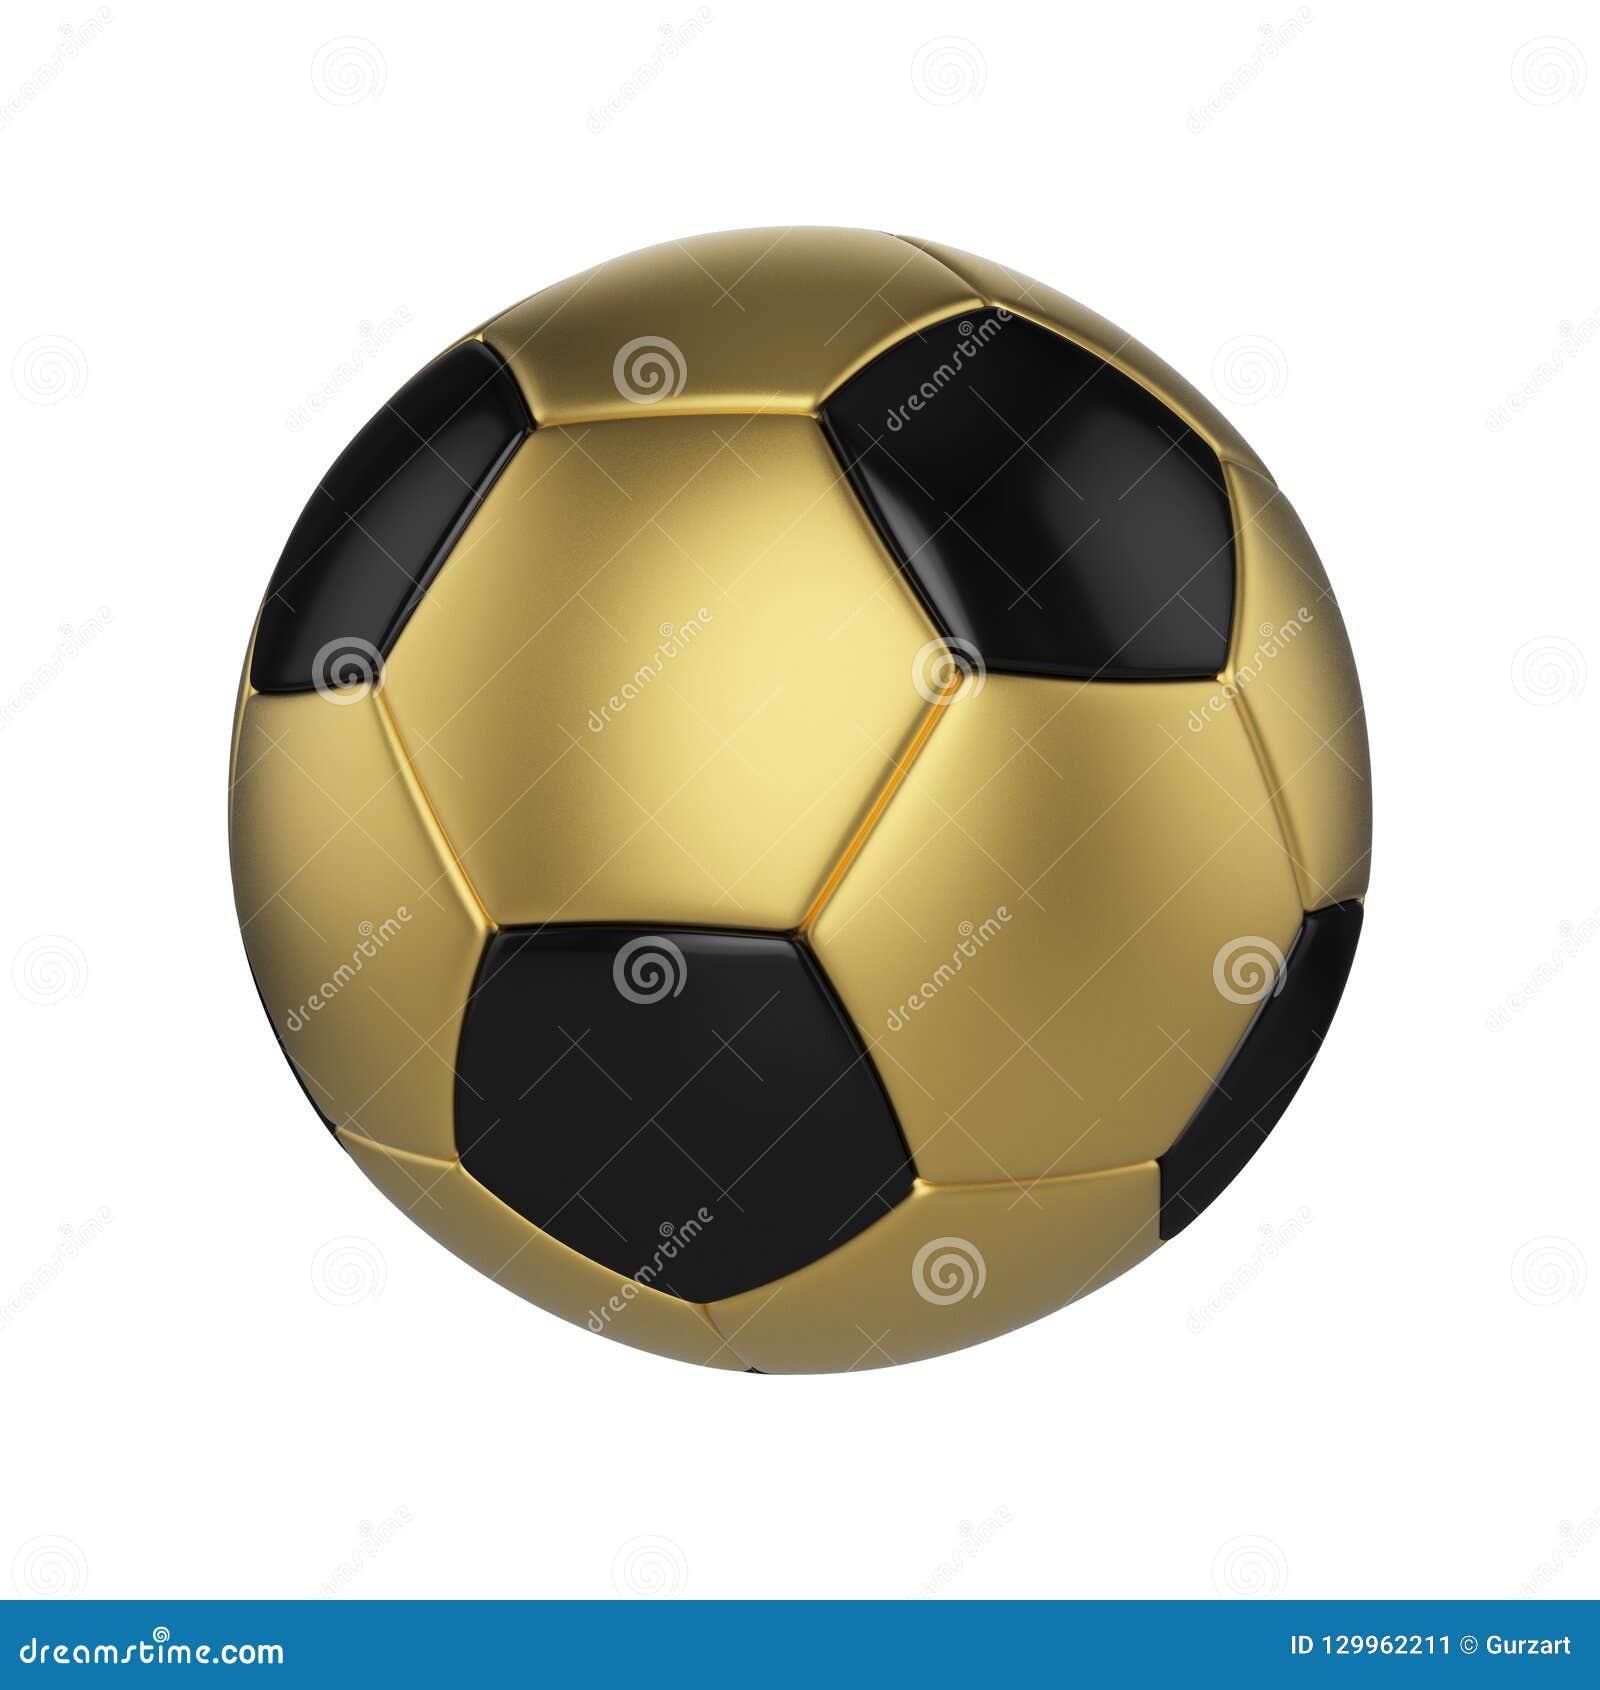 Soccer Ball Isolated on White Background. Black and Gold Football Ball  Stock Illustration - Illustration of object, leather: 129962211